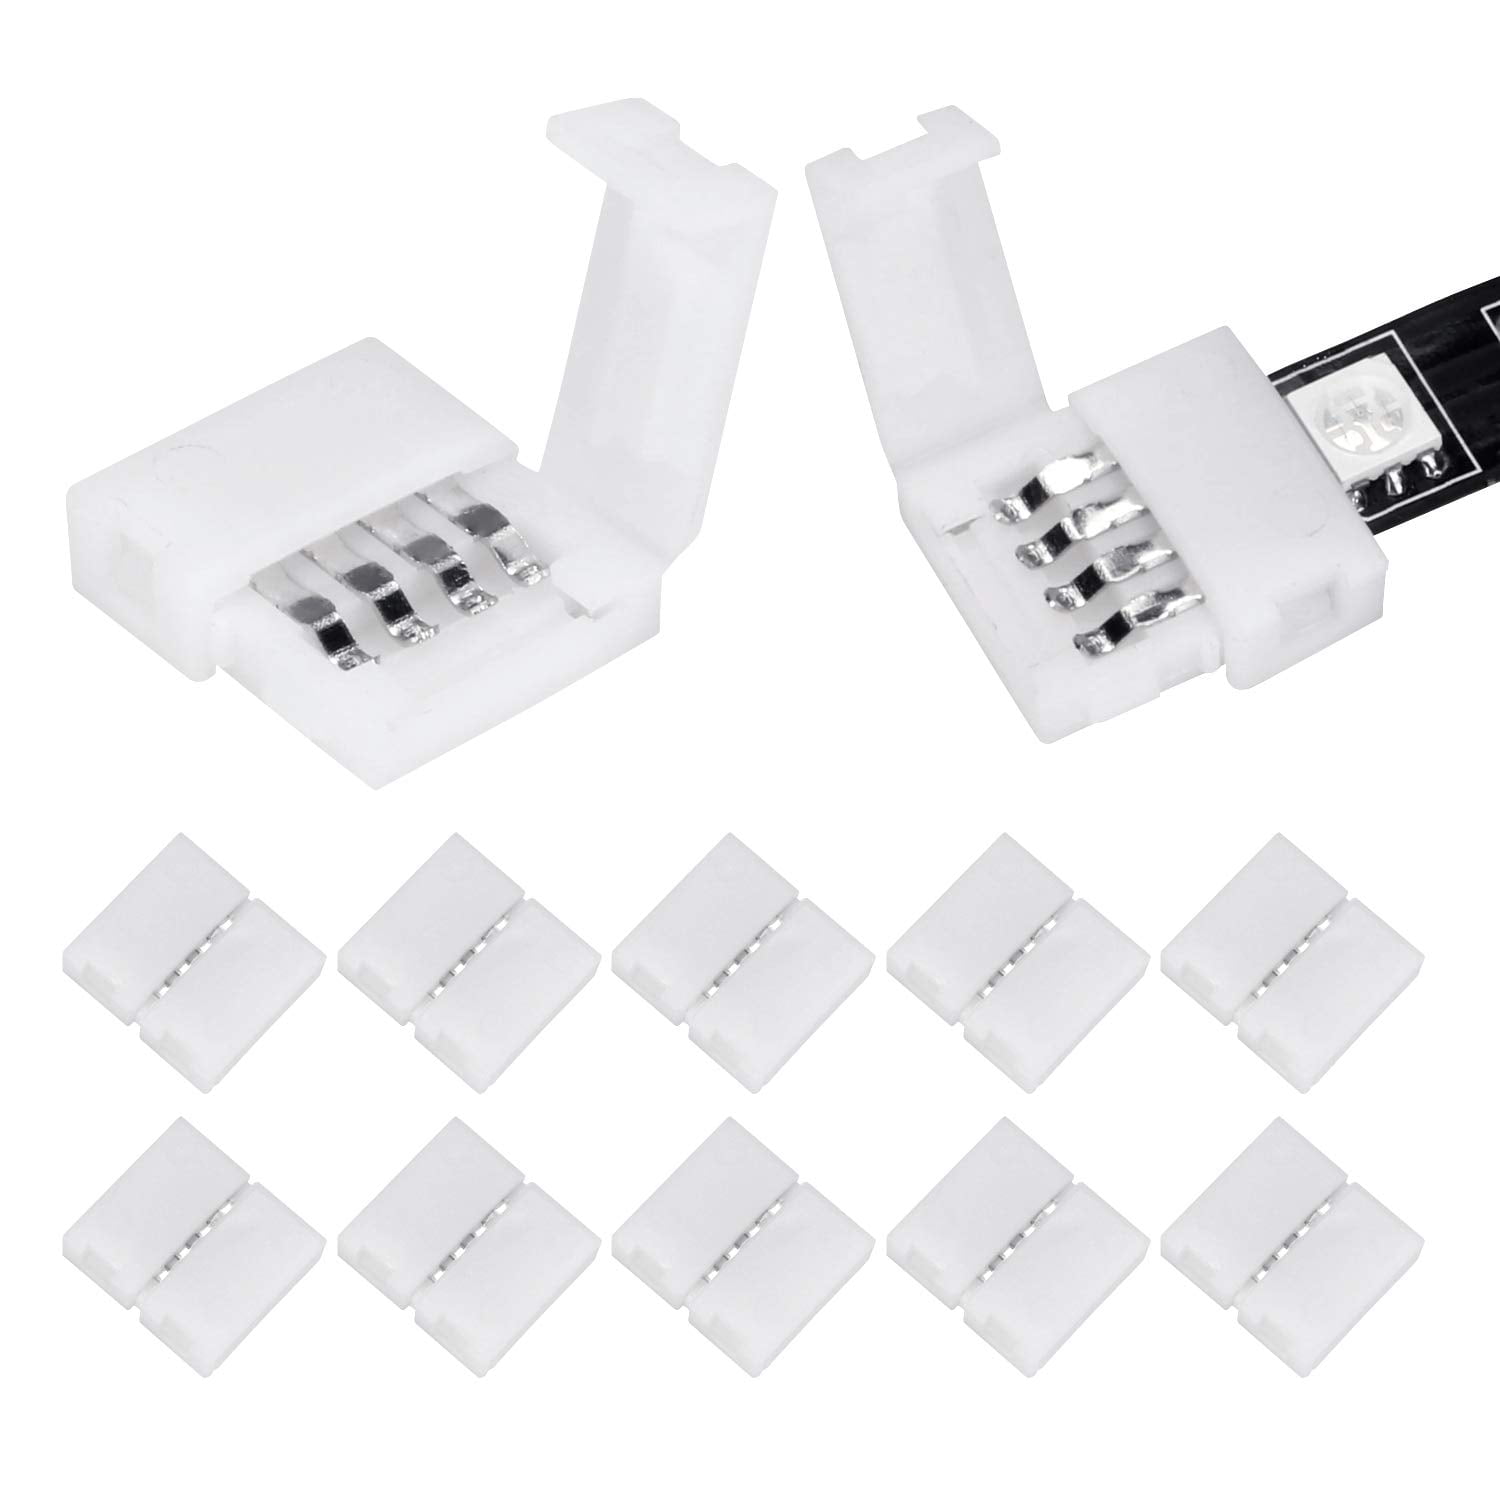 10Packs 4-Pin RGB Light Connectors 10mm Unwired Gapless Solderless Adapter Terminal Extension for SMD 5050 Multicolor LED Strip (10Pack 4PIN RGB Connector) Walmart.com